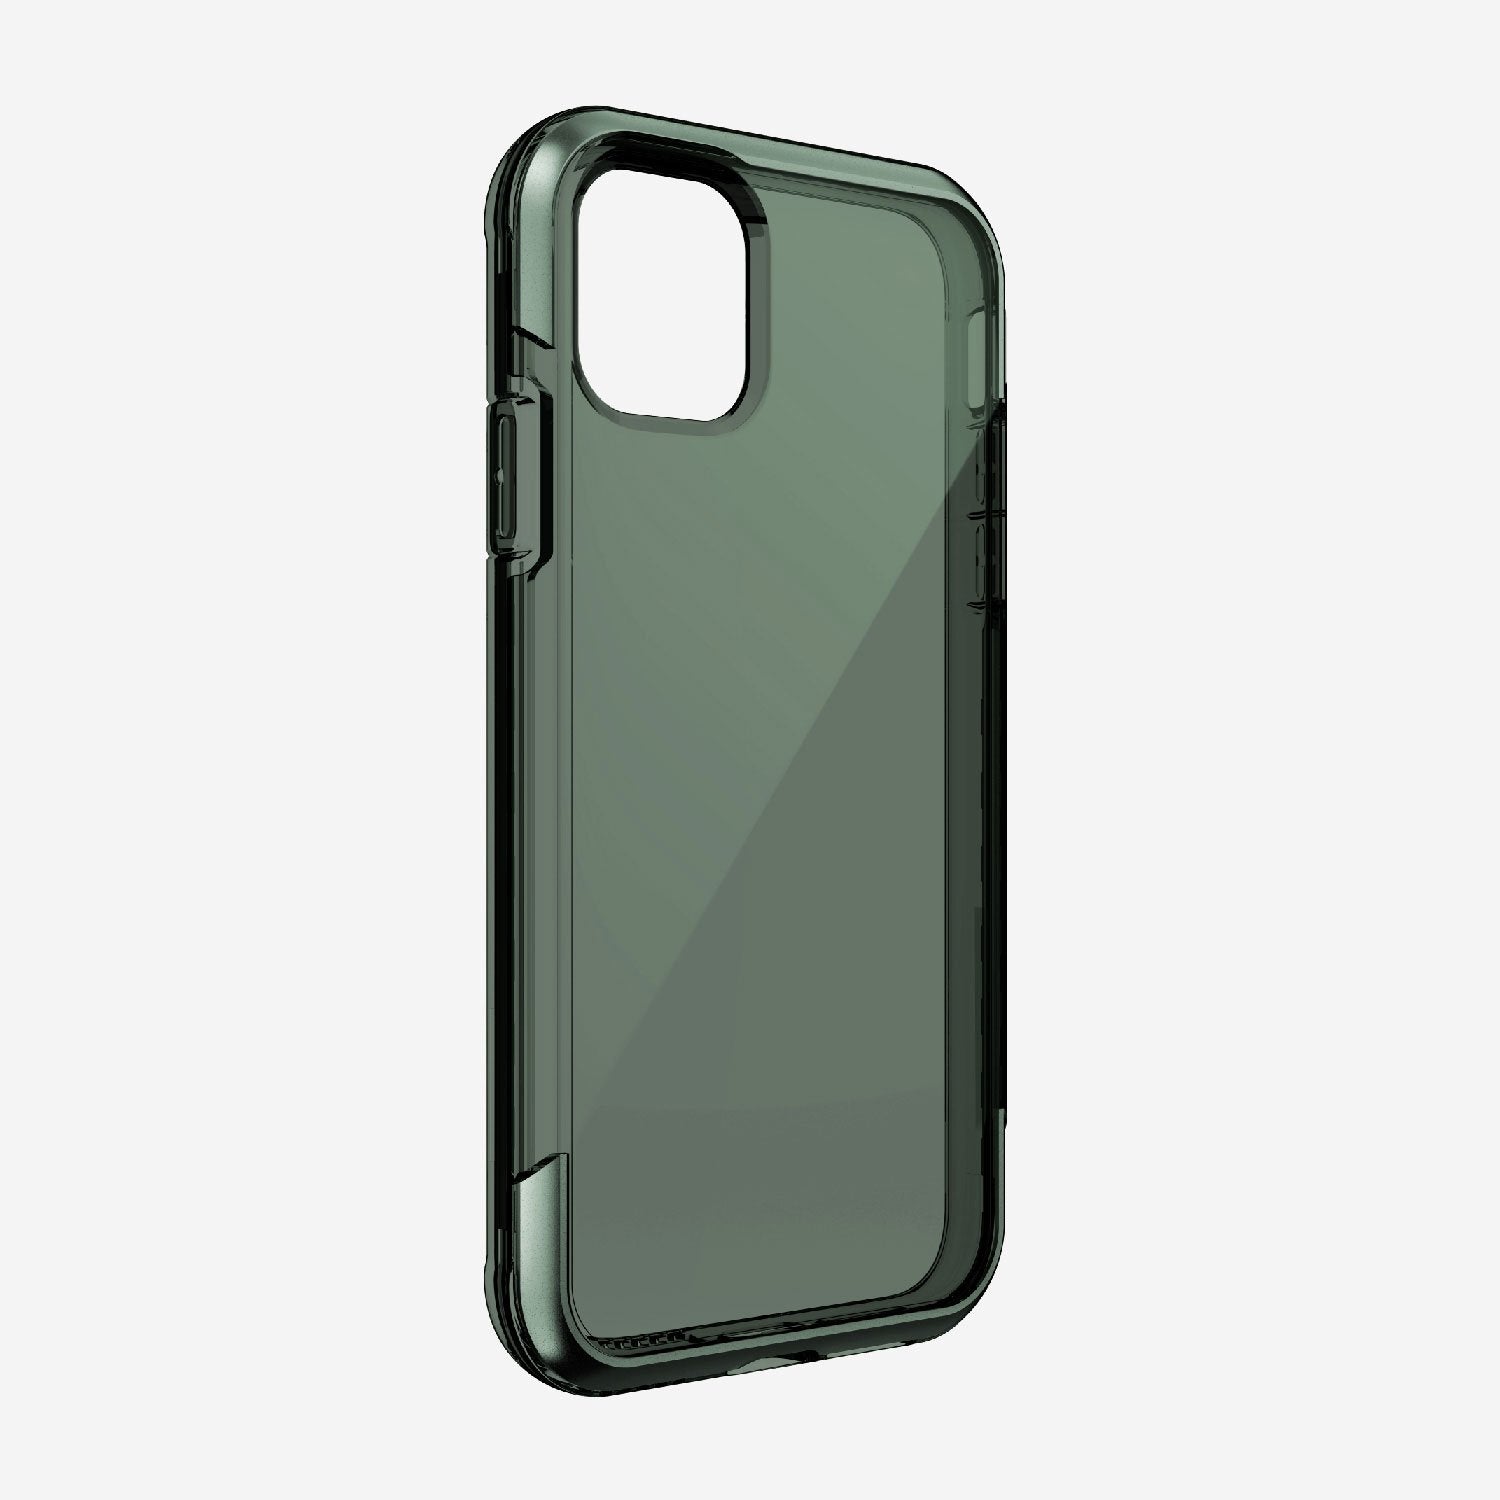 The back view of an iPhone 11 Pro Max Case - AIR in green featuring Raptic Air and 13-foot drop protection.